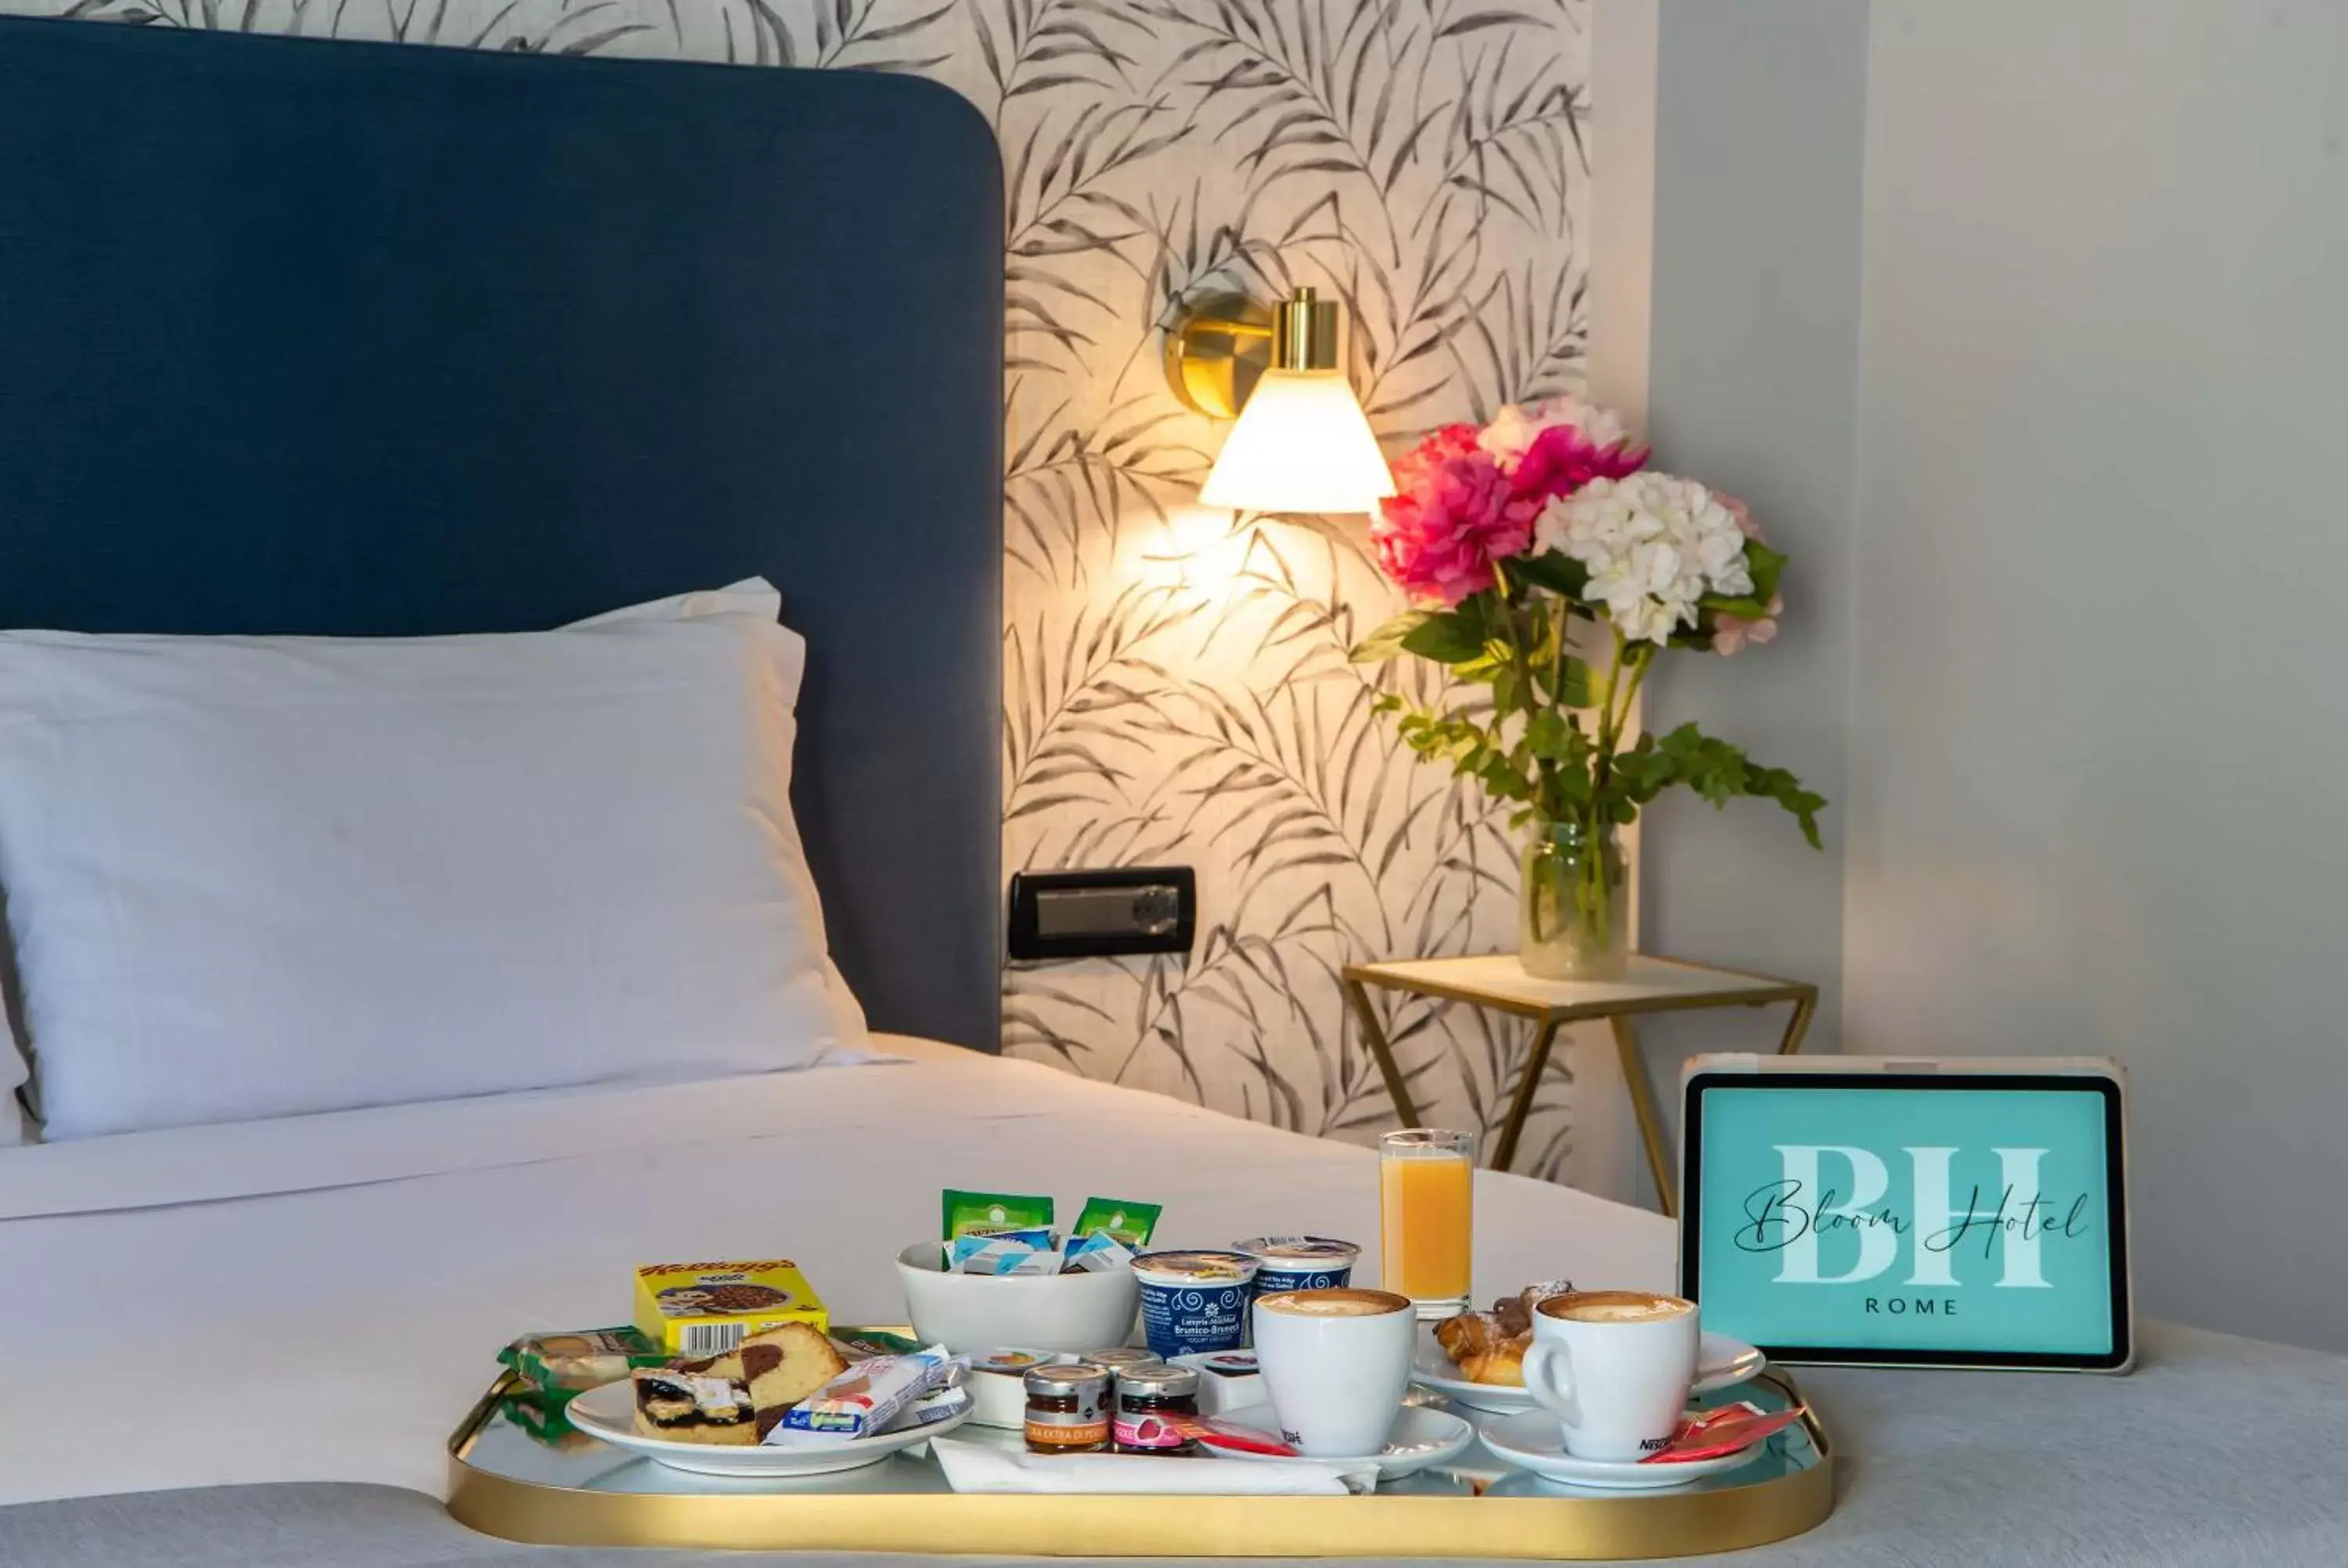 Bed in Bloom Hotel Rome